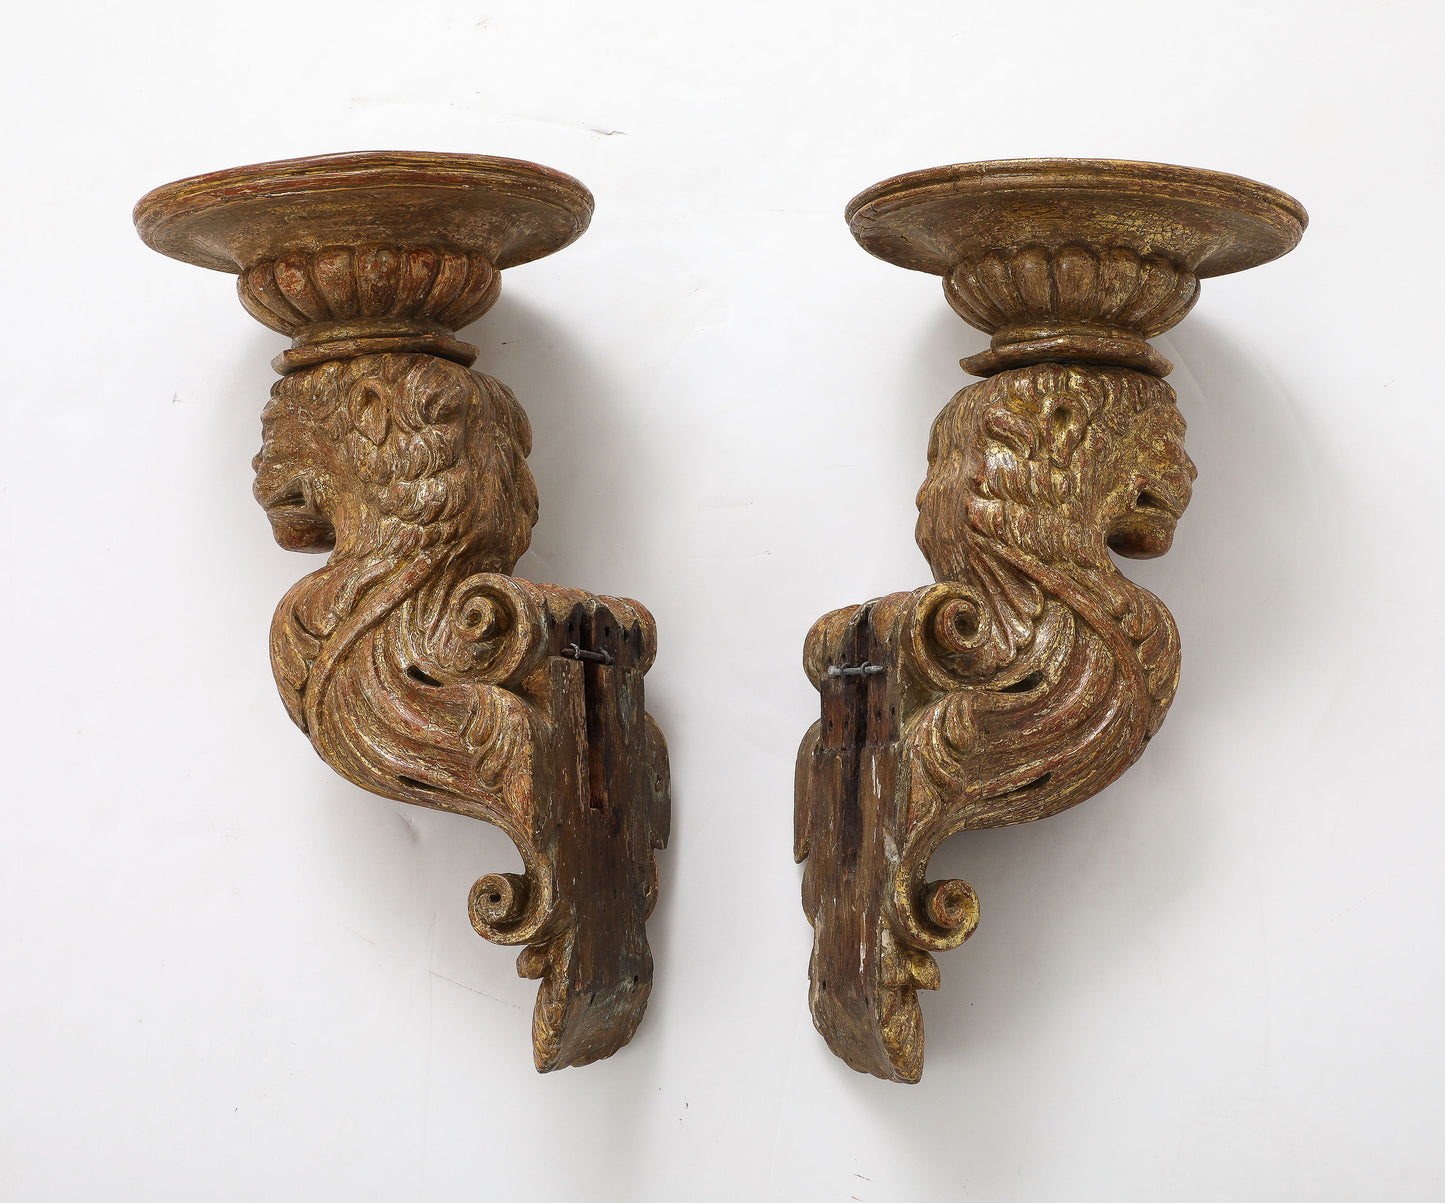 A RARE AND UNUSUAL PAIR OF BRACKETS,  c. 1830